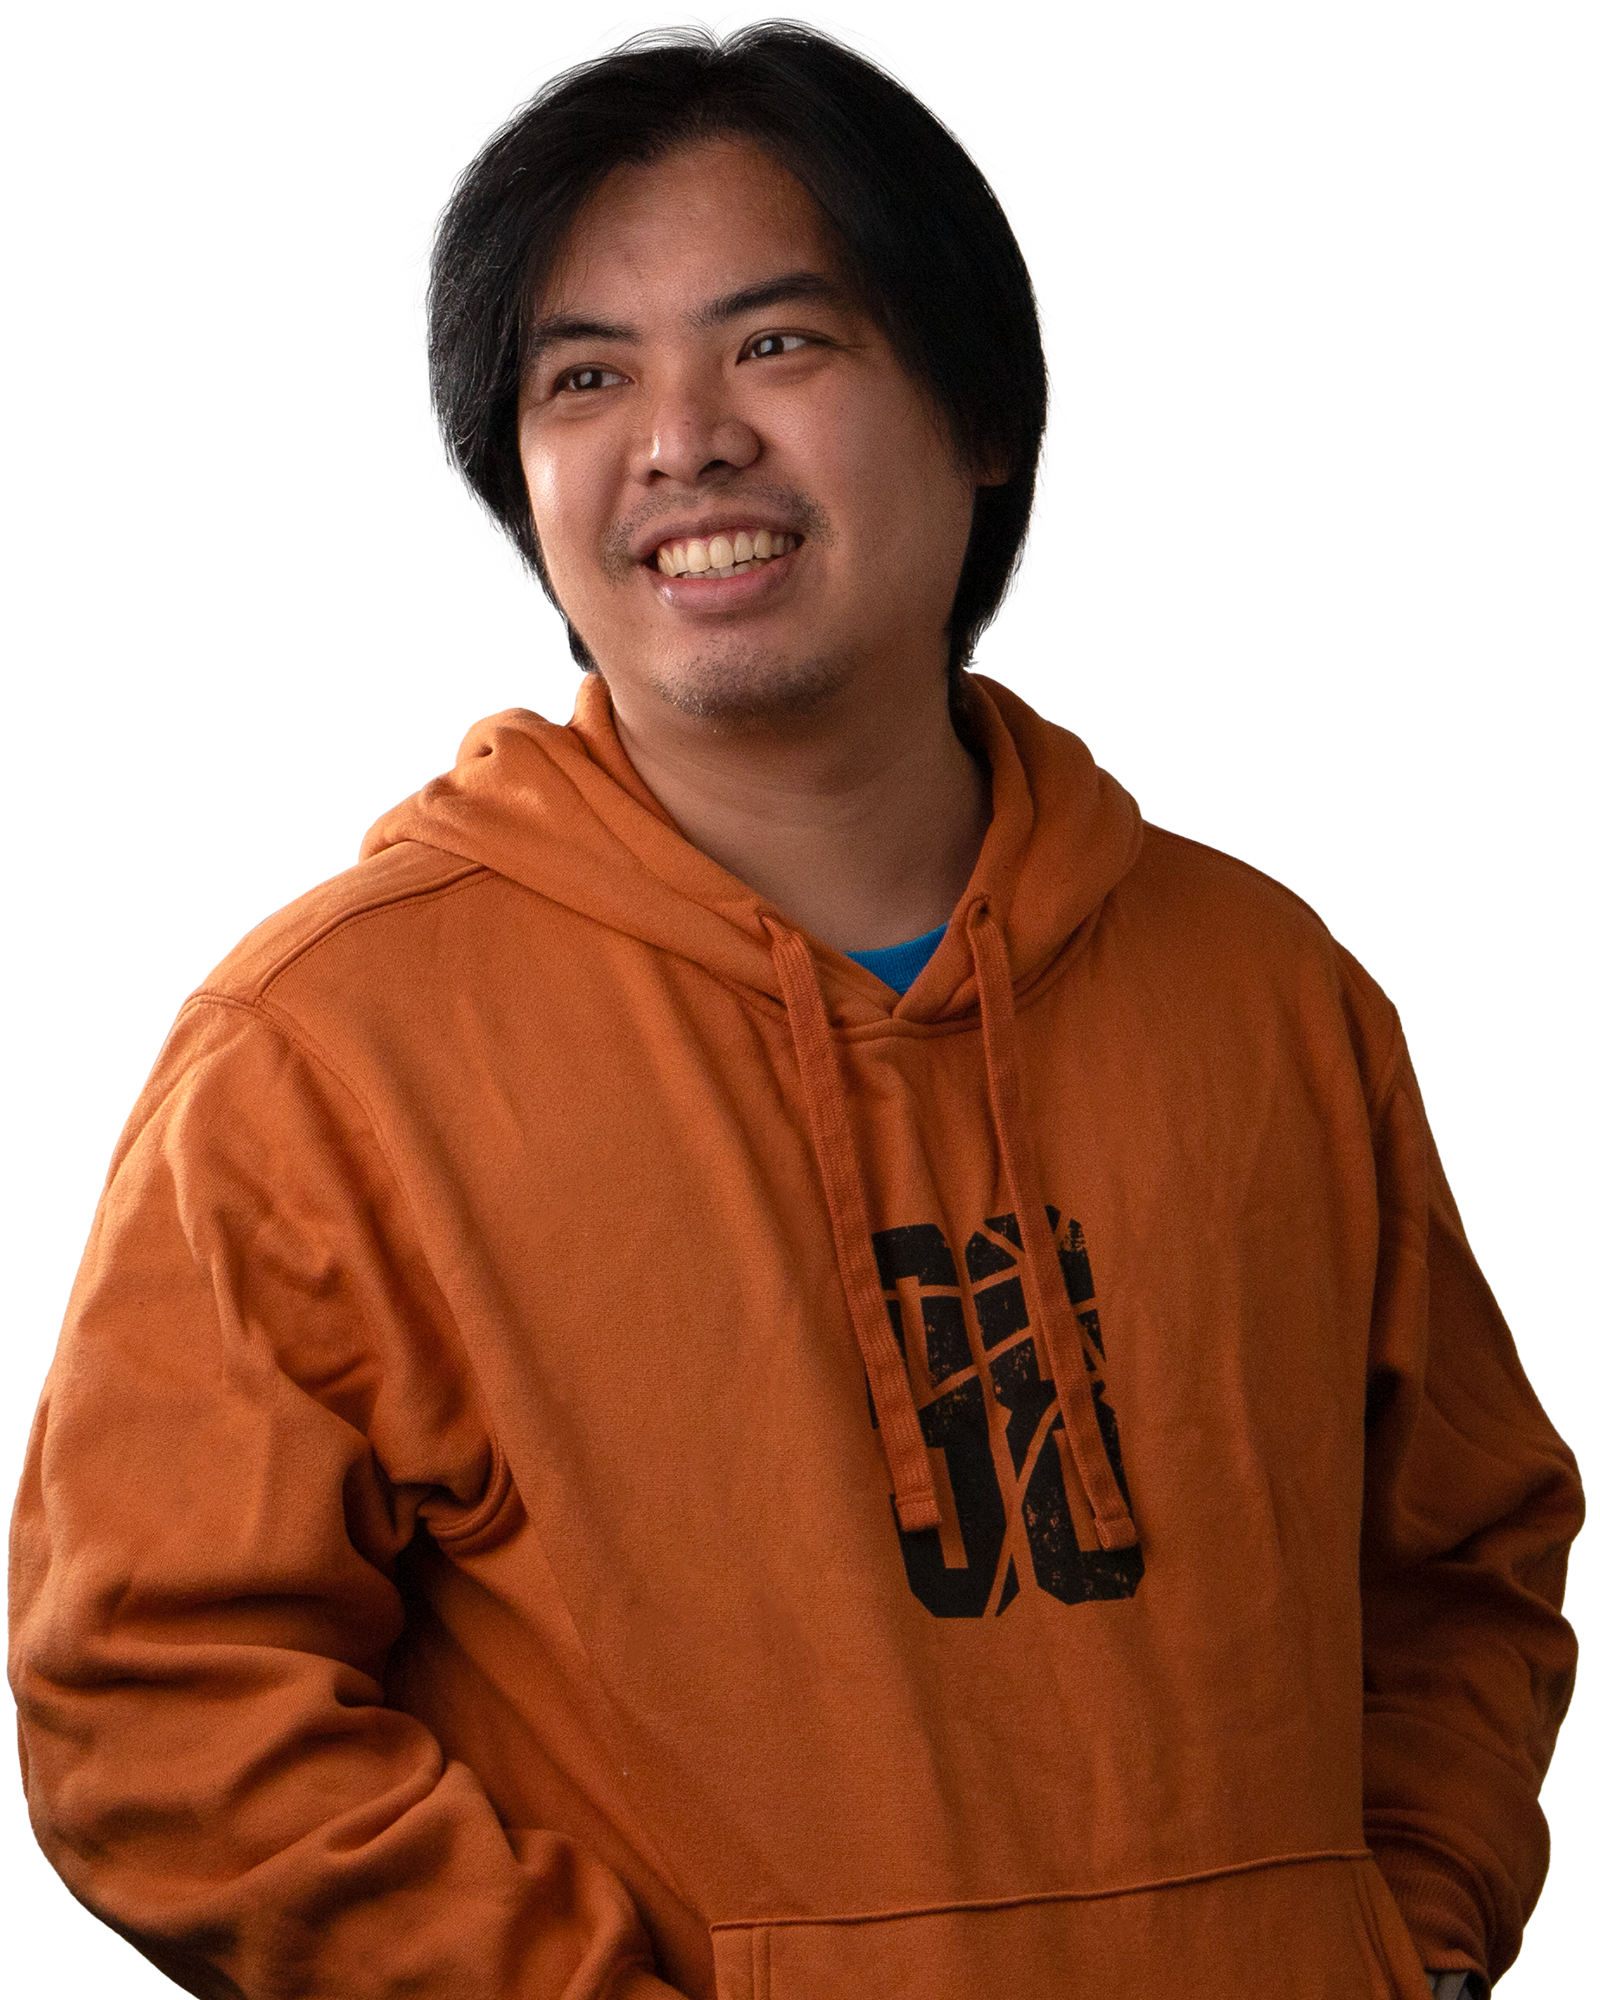 A man with black hair, wearing an orange hoodie and smiling.